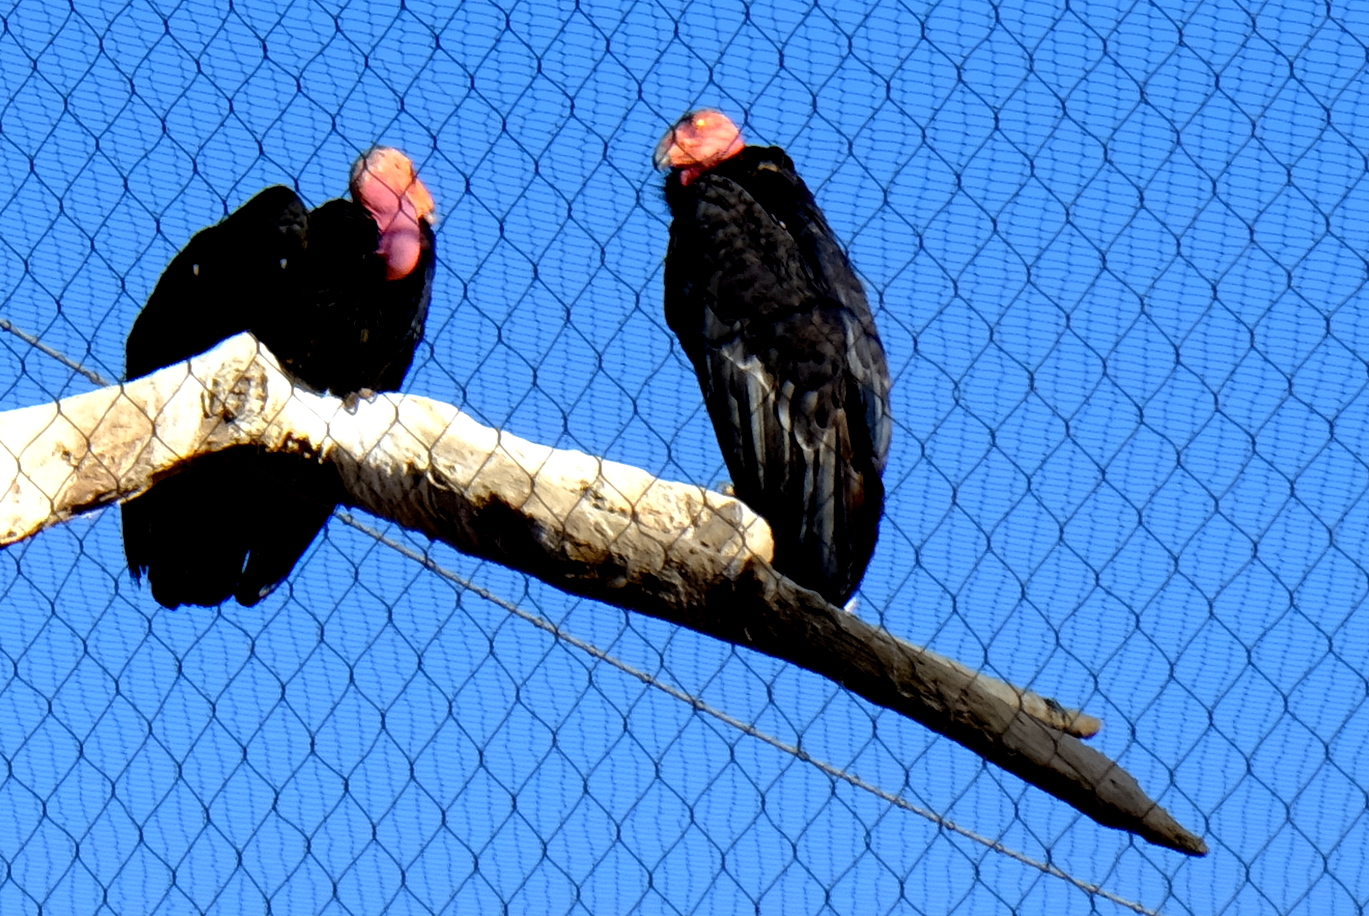 two black birds sit on a nch, facing away from the camera